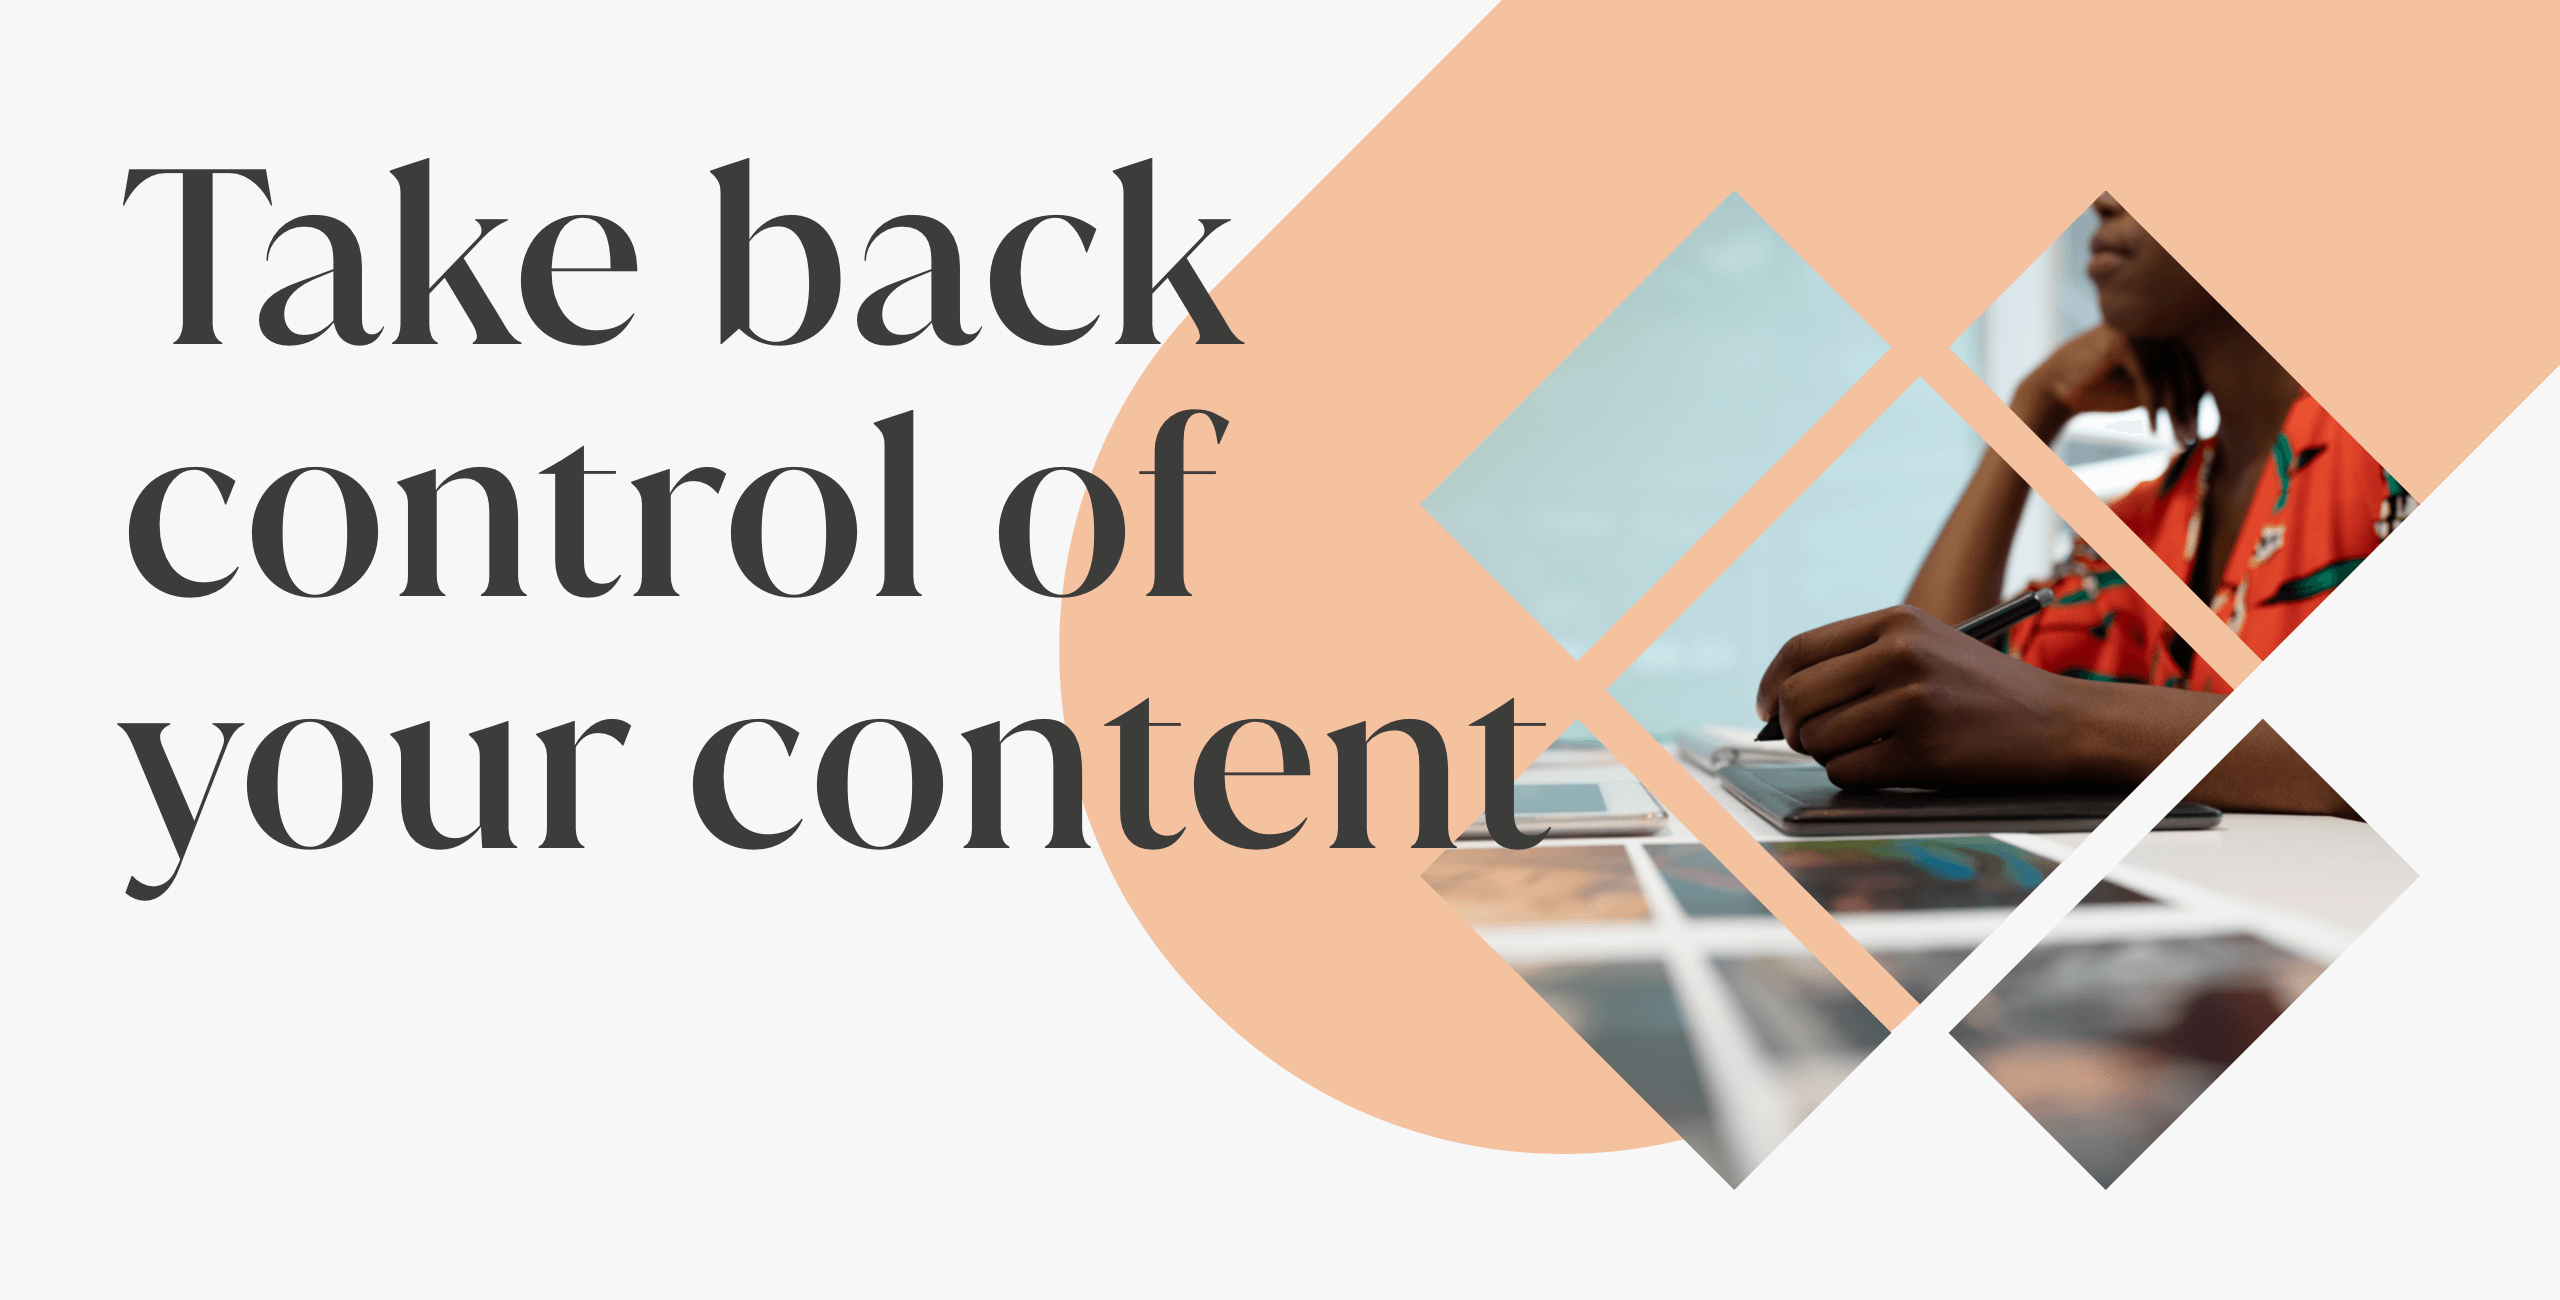 Take back  control of  your content_social-post2